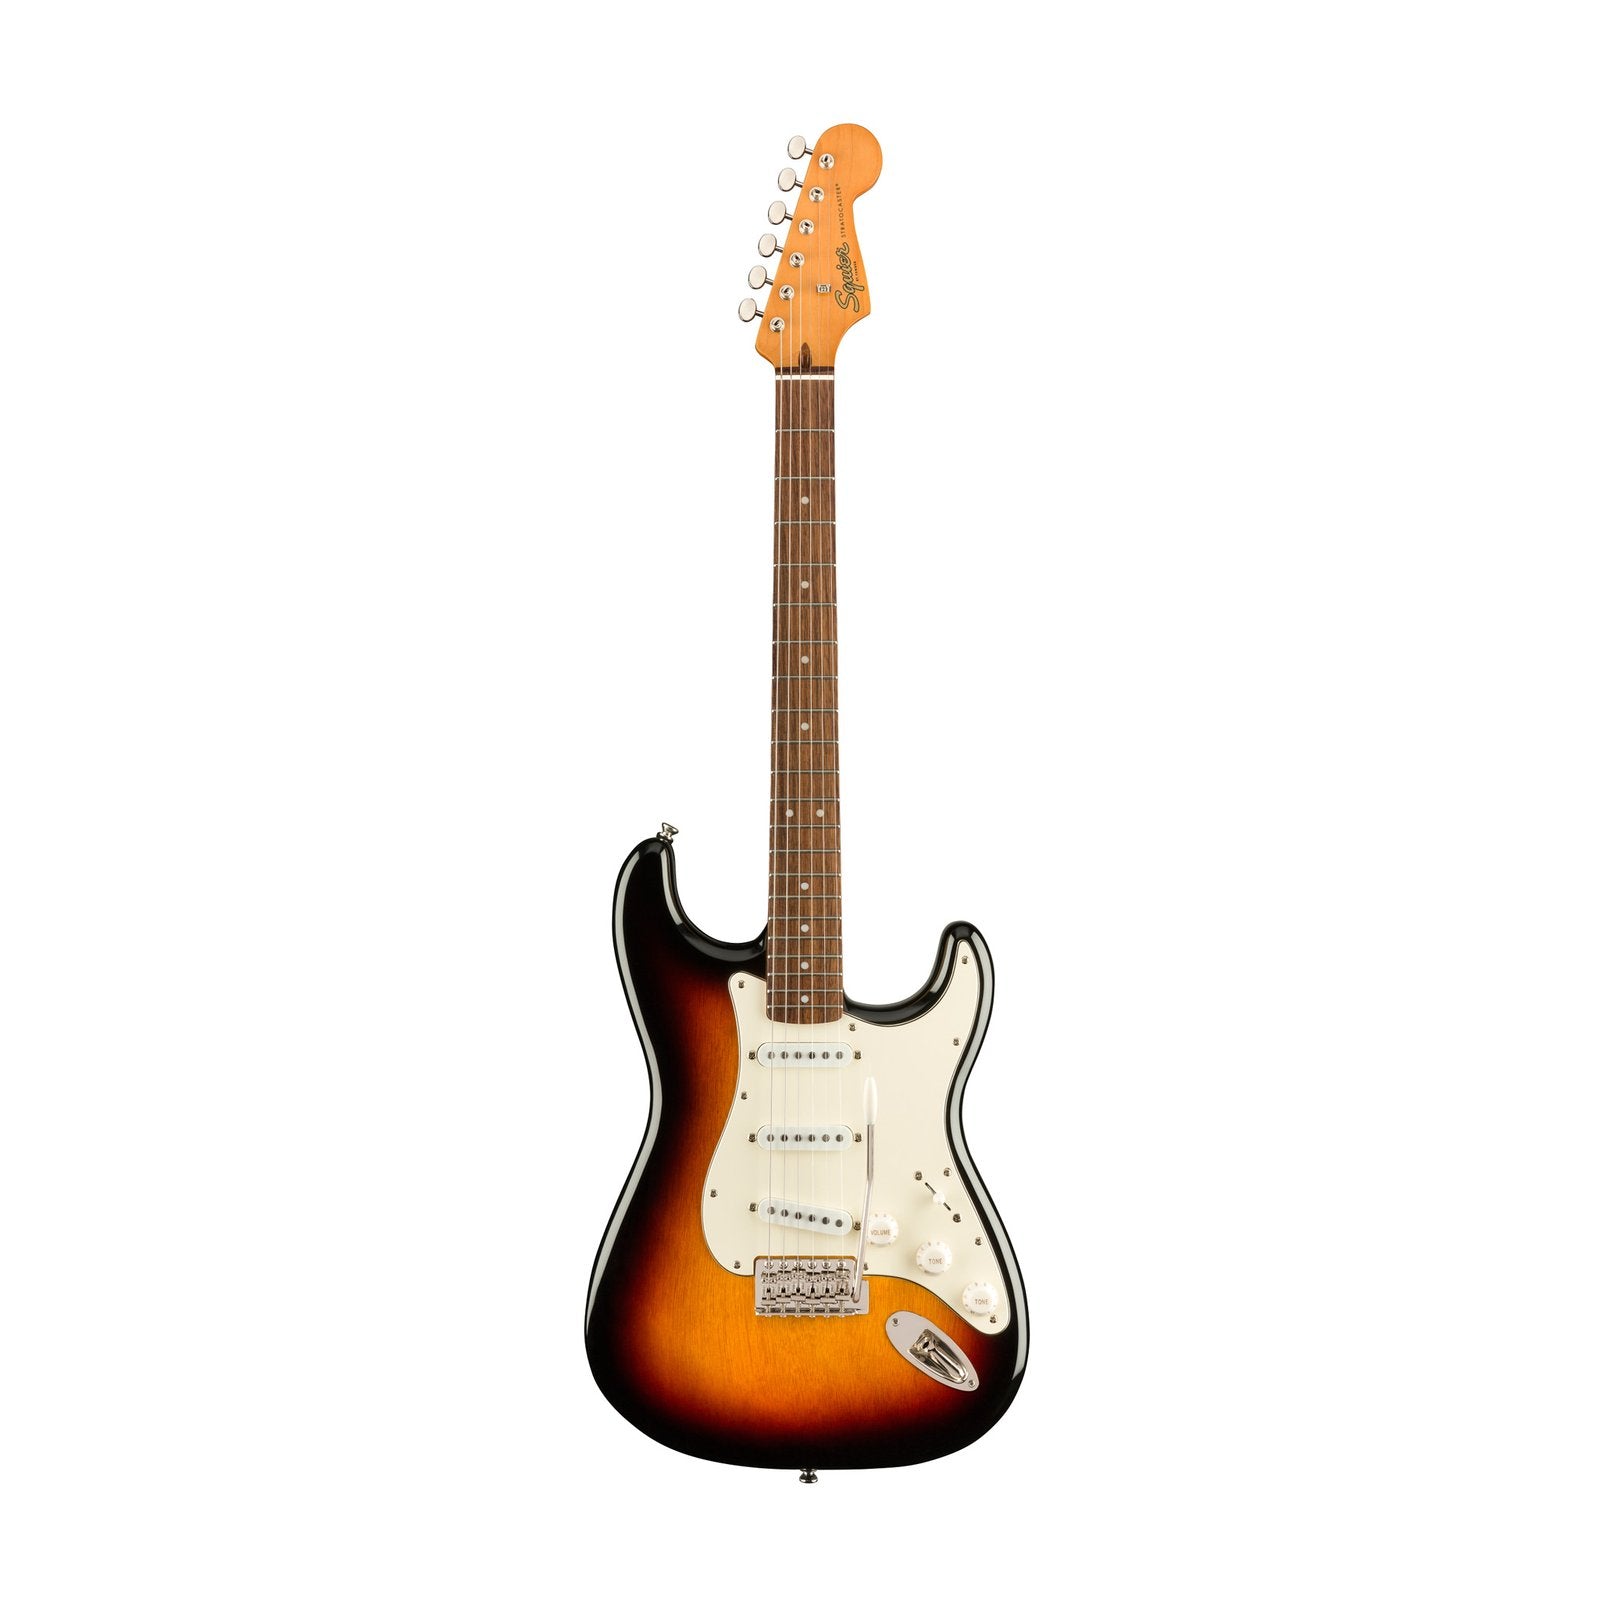 Squier Classic Vibe 60s Stratocaster Electric Guitar, Laurel FB, 3-Tone Sunburst, SQUIER BY FENDER, ELECTRIC GUITAR, squier-by-fender-electric-guitar-037-4010-500, ZOSO MUSIC SDN BHD